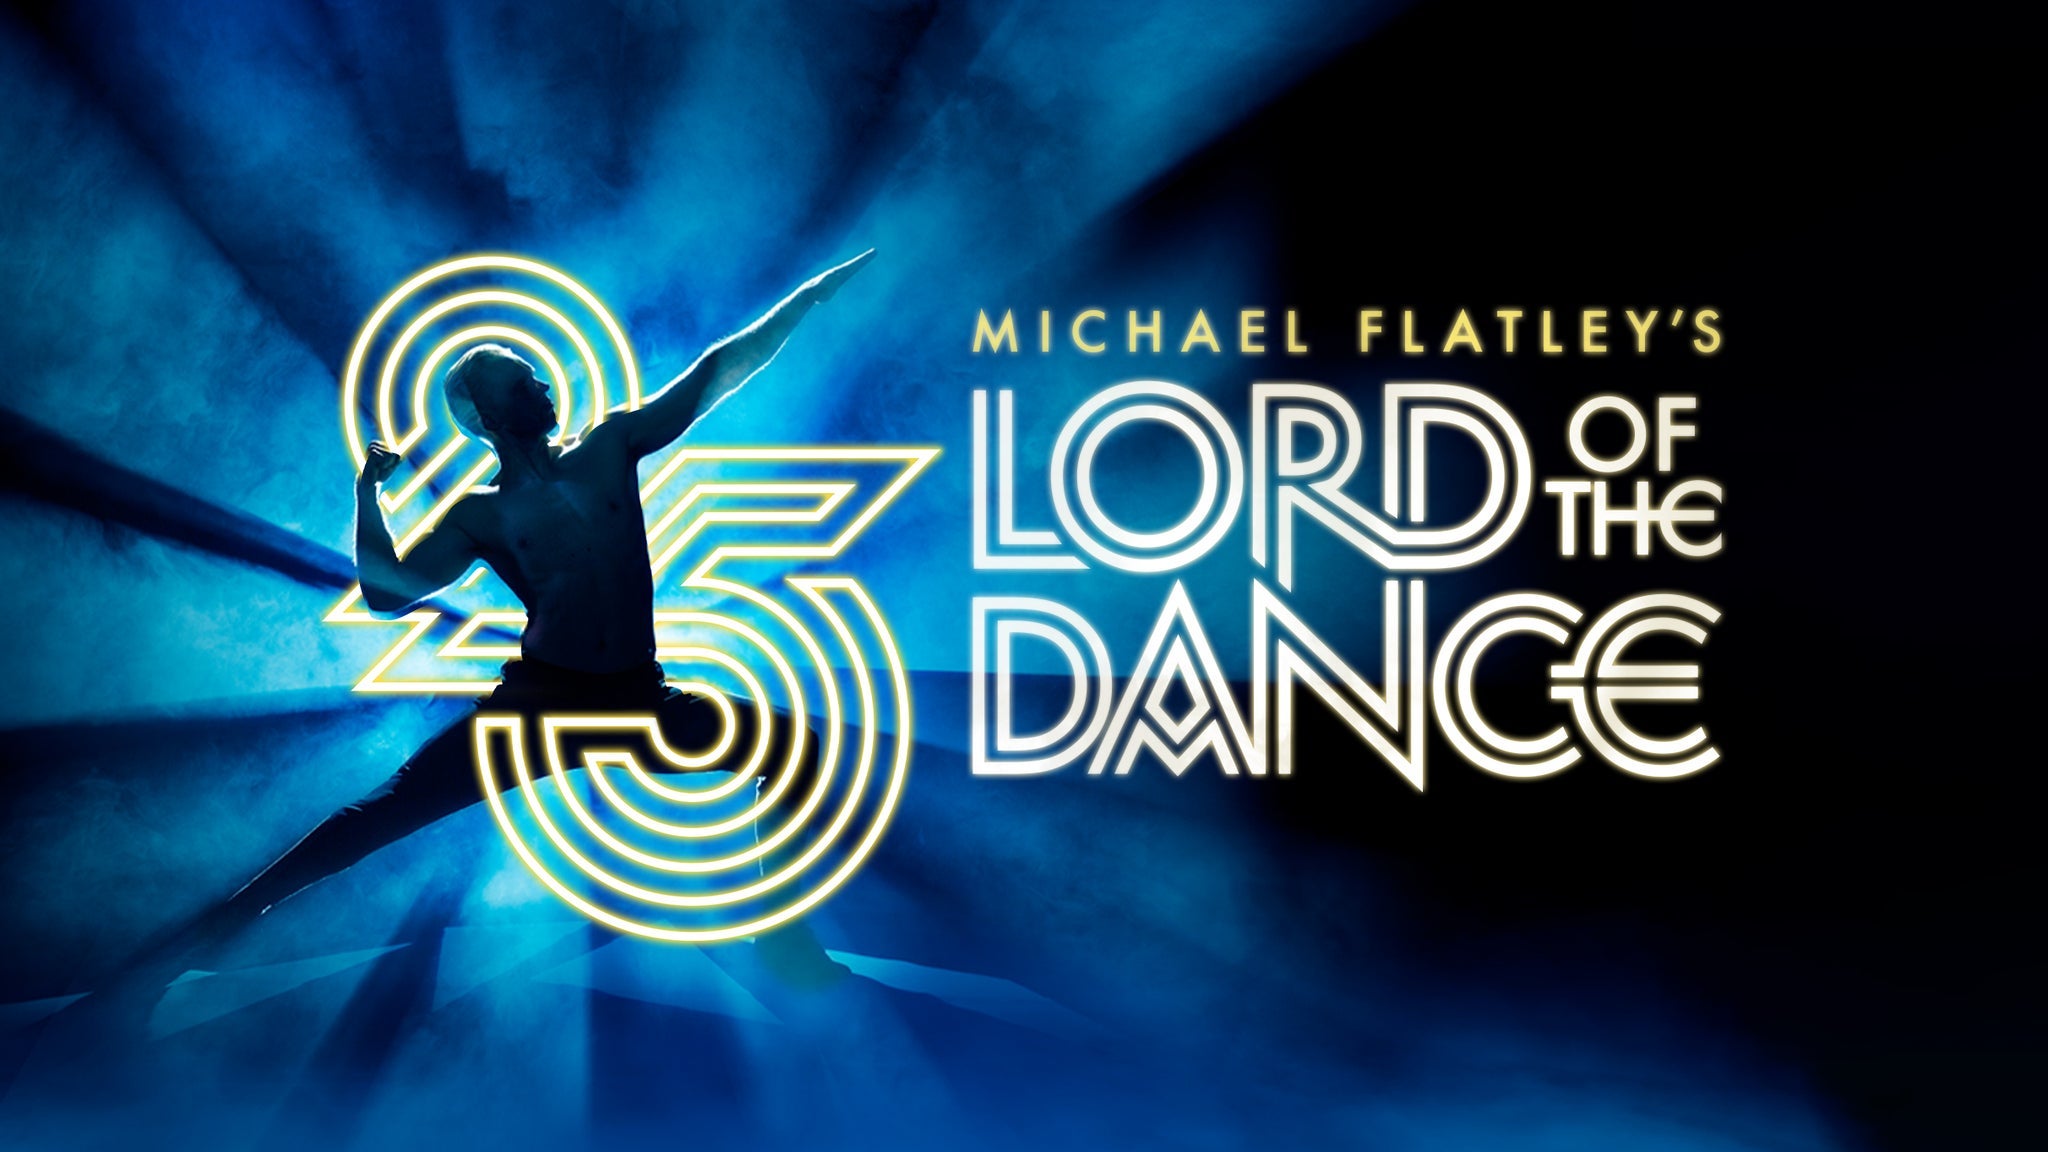 Michael Flatley's Lord of the Dance - 25th Anniversary Tour